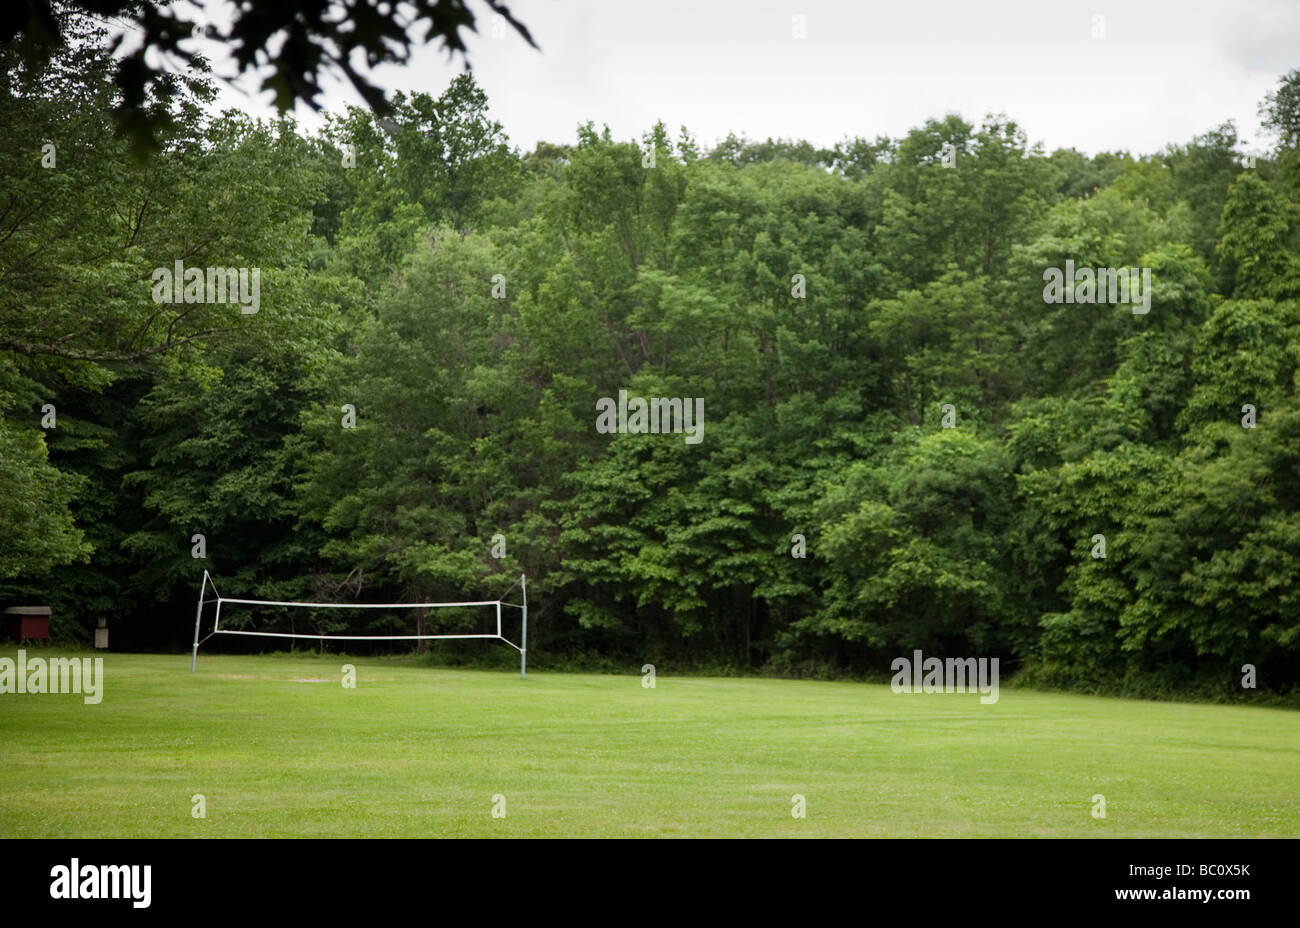 A volleyball net in a field Stock Photo